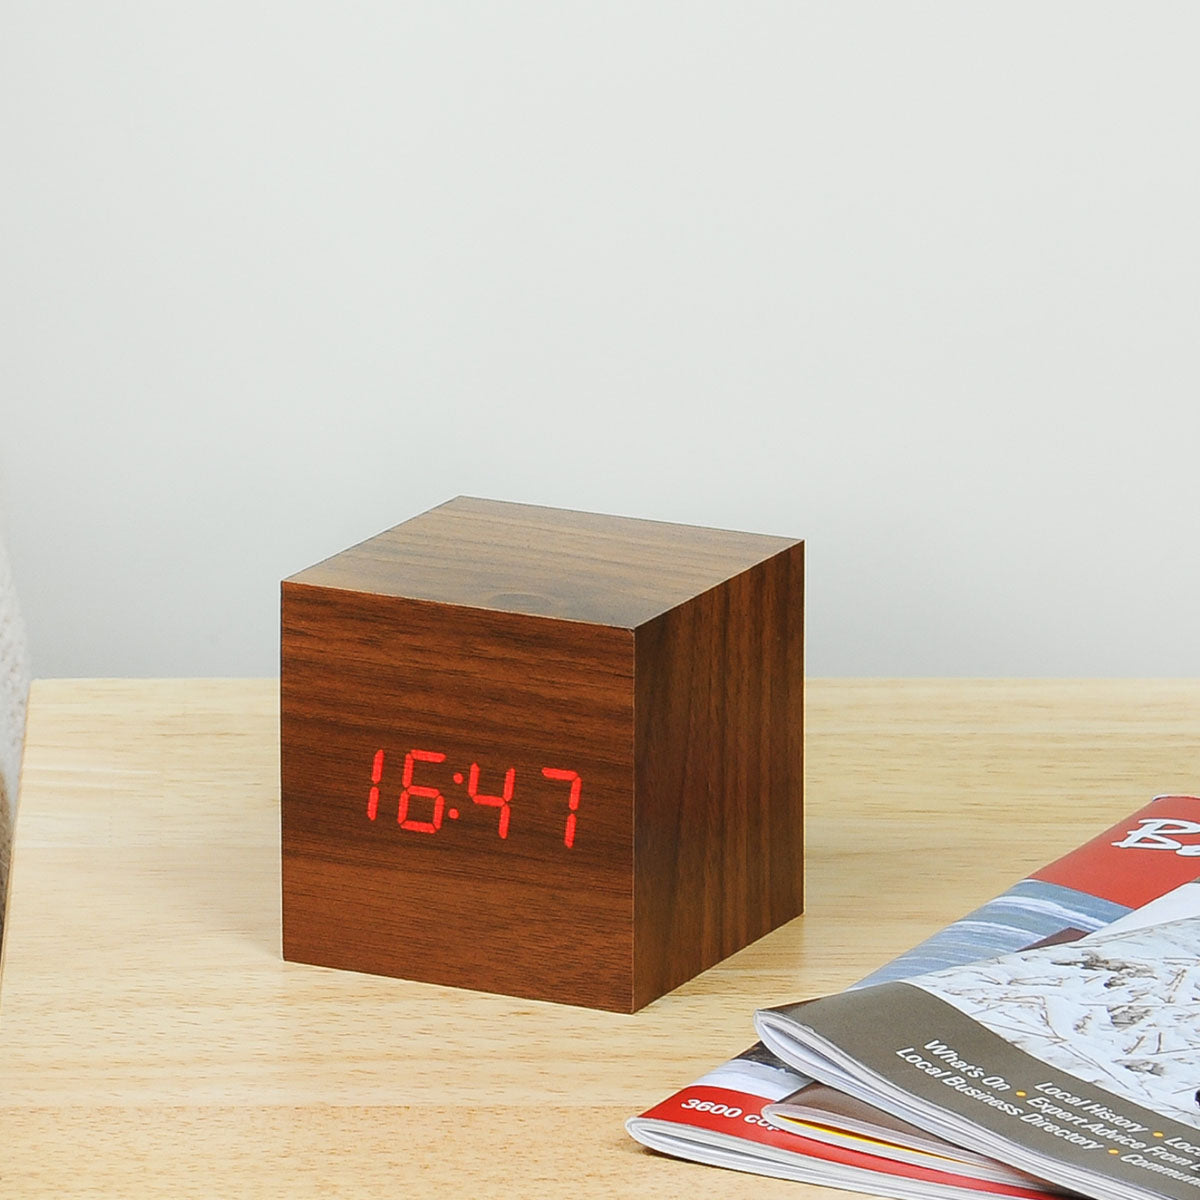 The Cube Click Clock: Walnut on a desk on its 24 hour time setting.